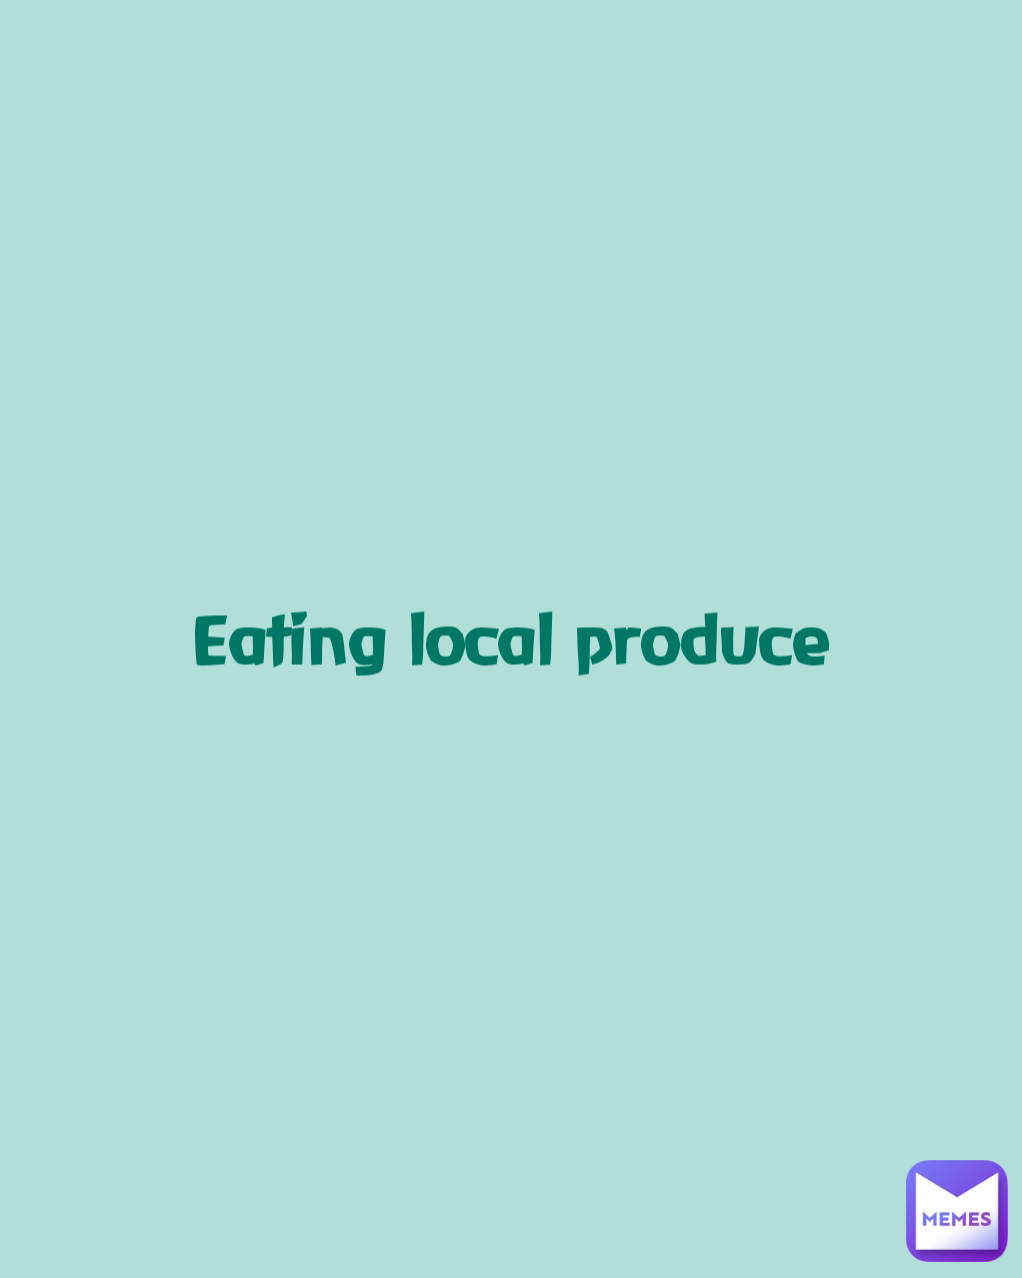 Eating local produce